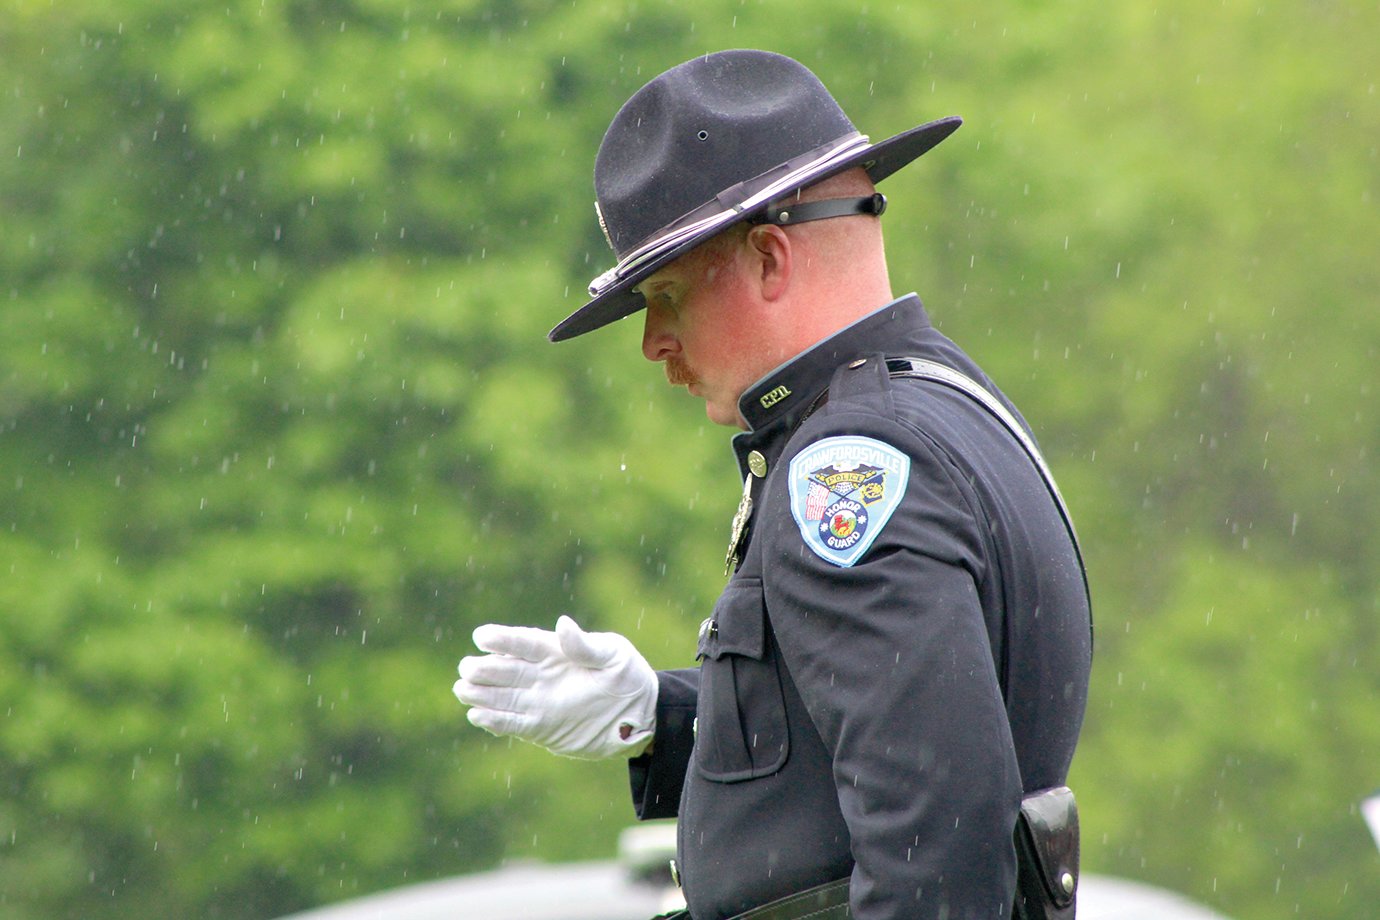 Inclement weather couldn’t stop CPD Lt. Jared Templeman and his fellow officers from performing a memorial service for fallen officers.